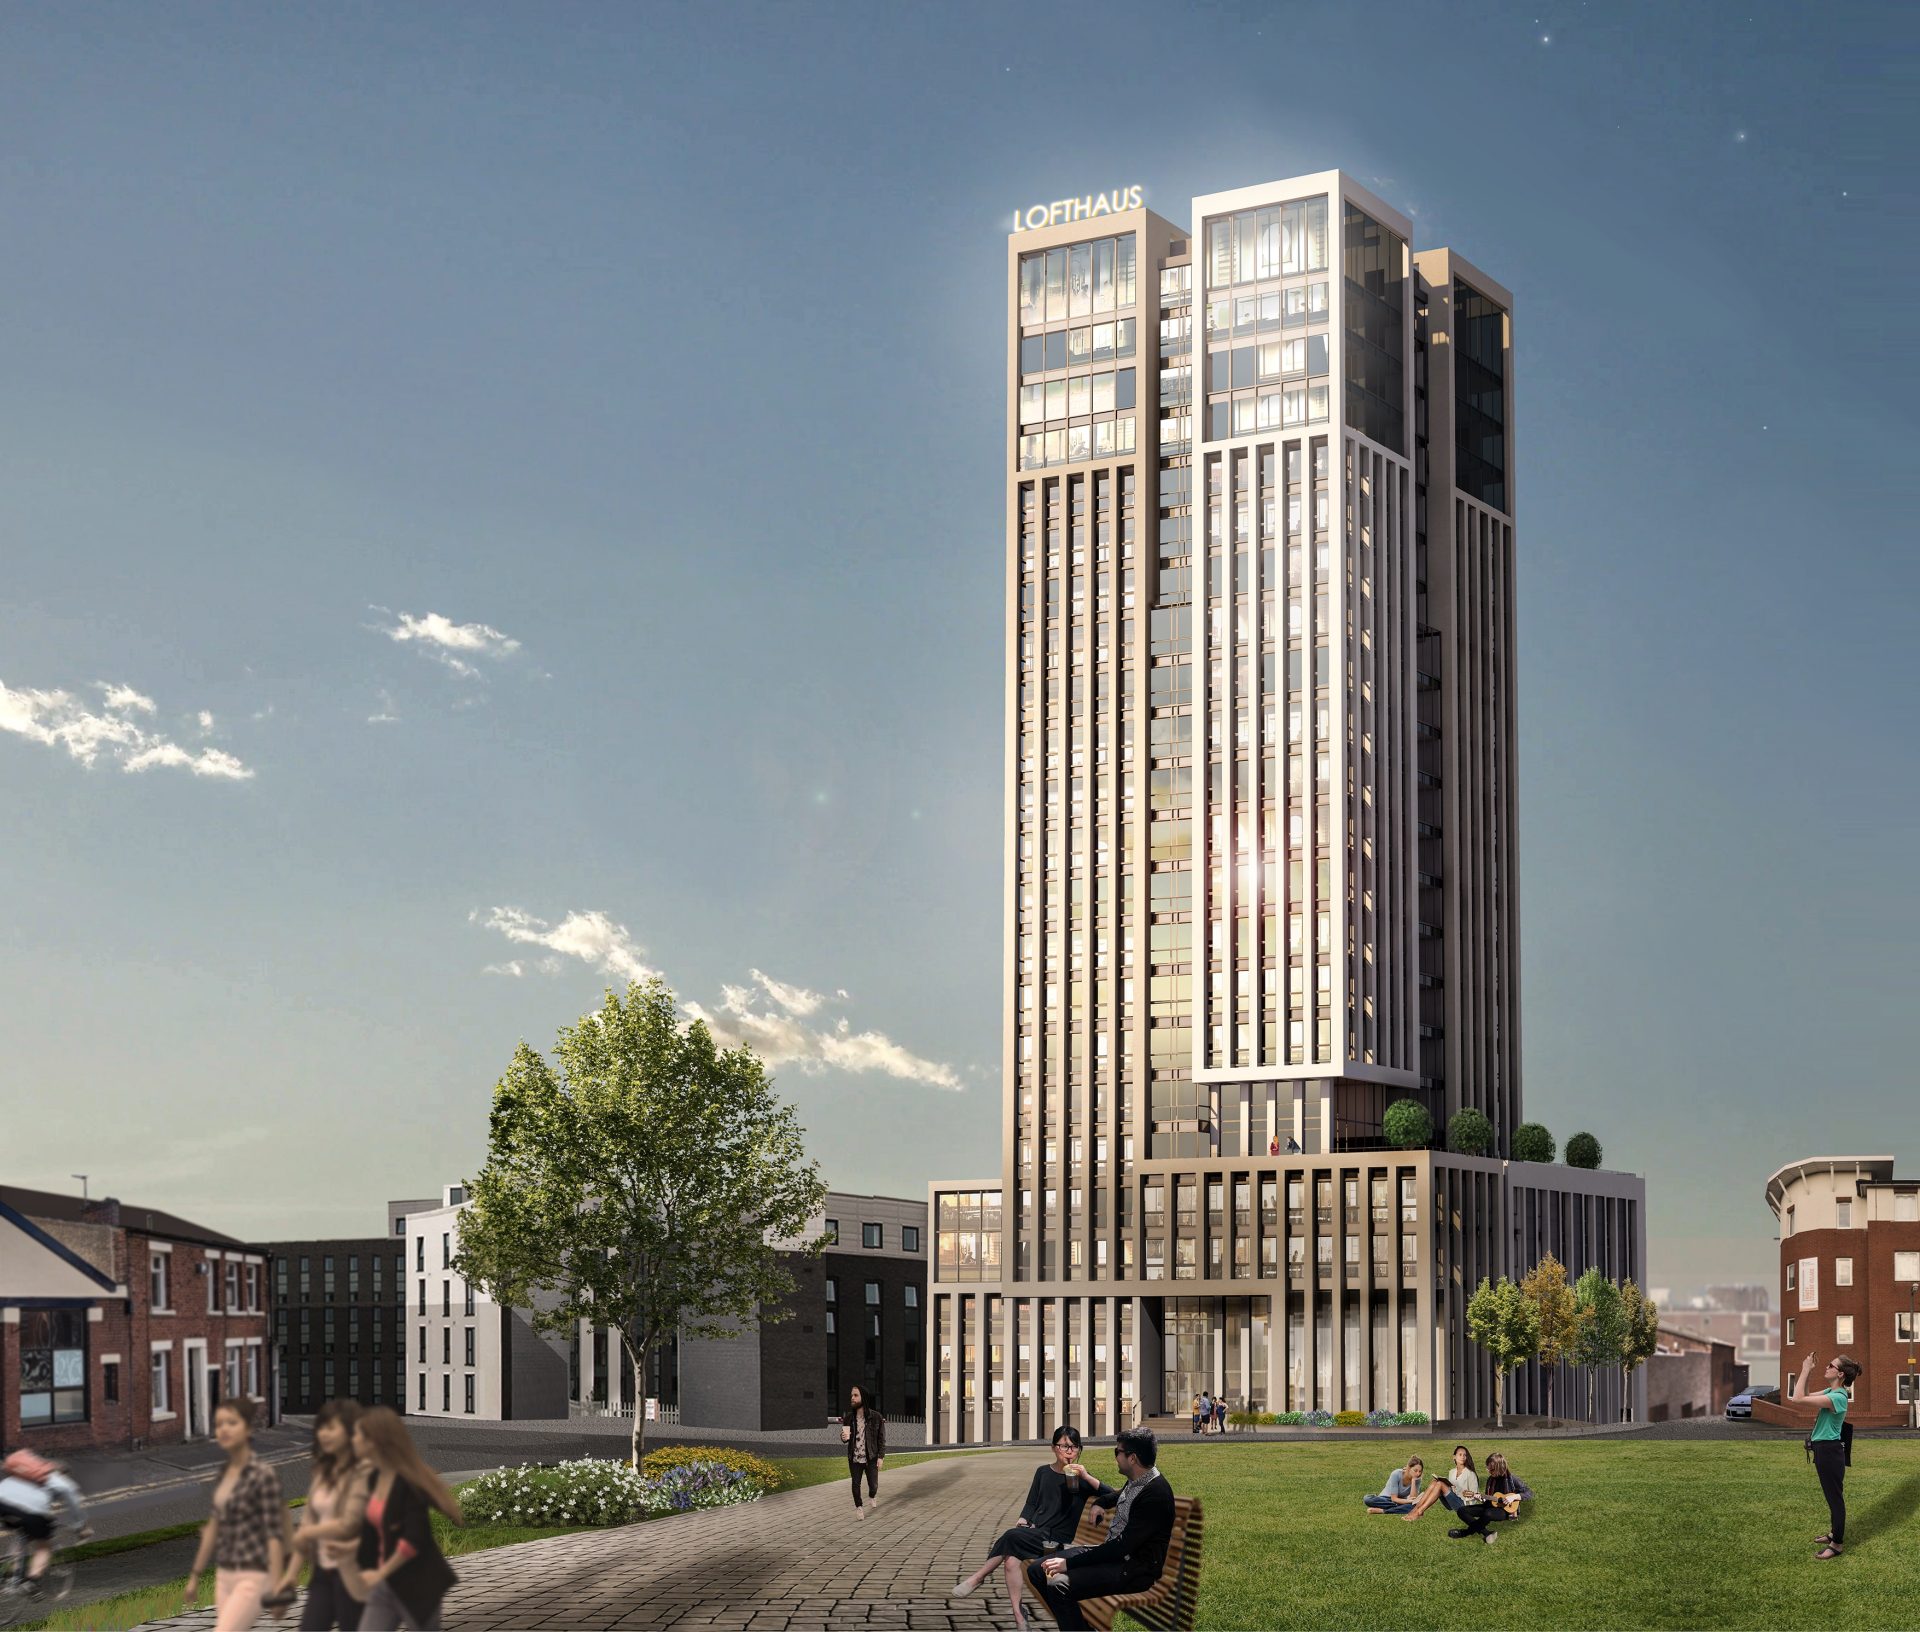 Lofthaus exterior elevation and landscape CGI Number one city in the Northwest Preston is driving the move to co-living developments for all ages